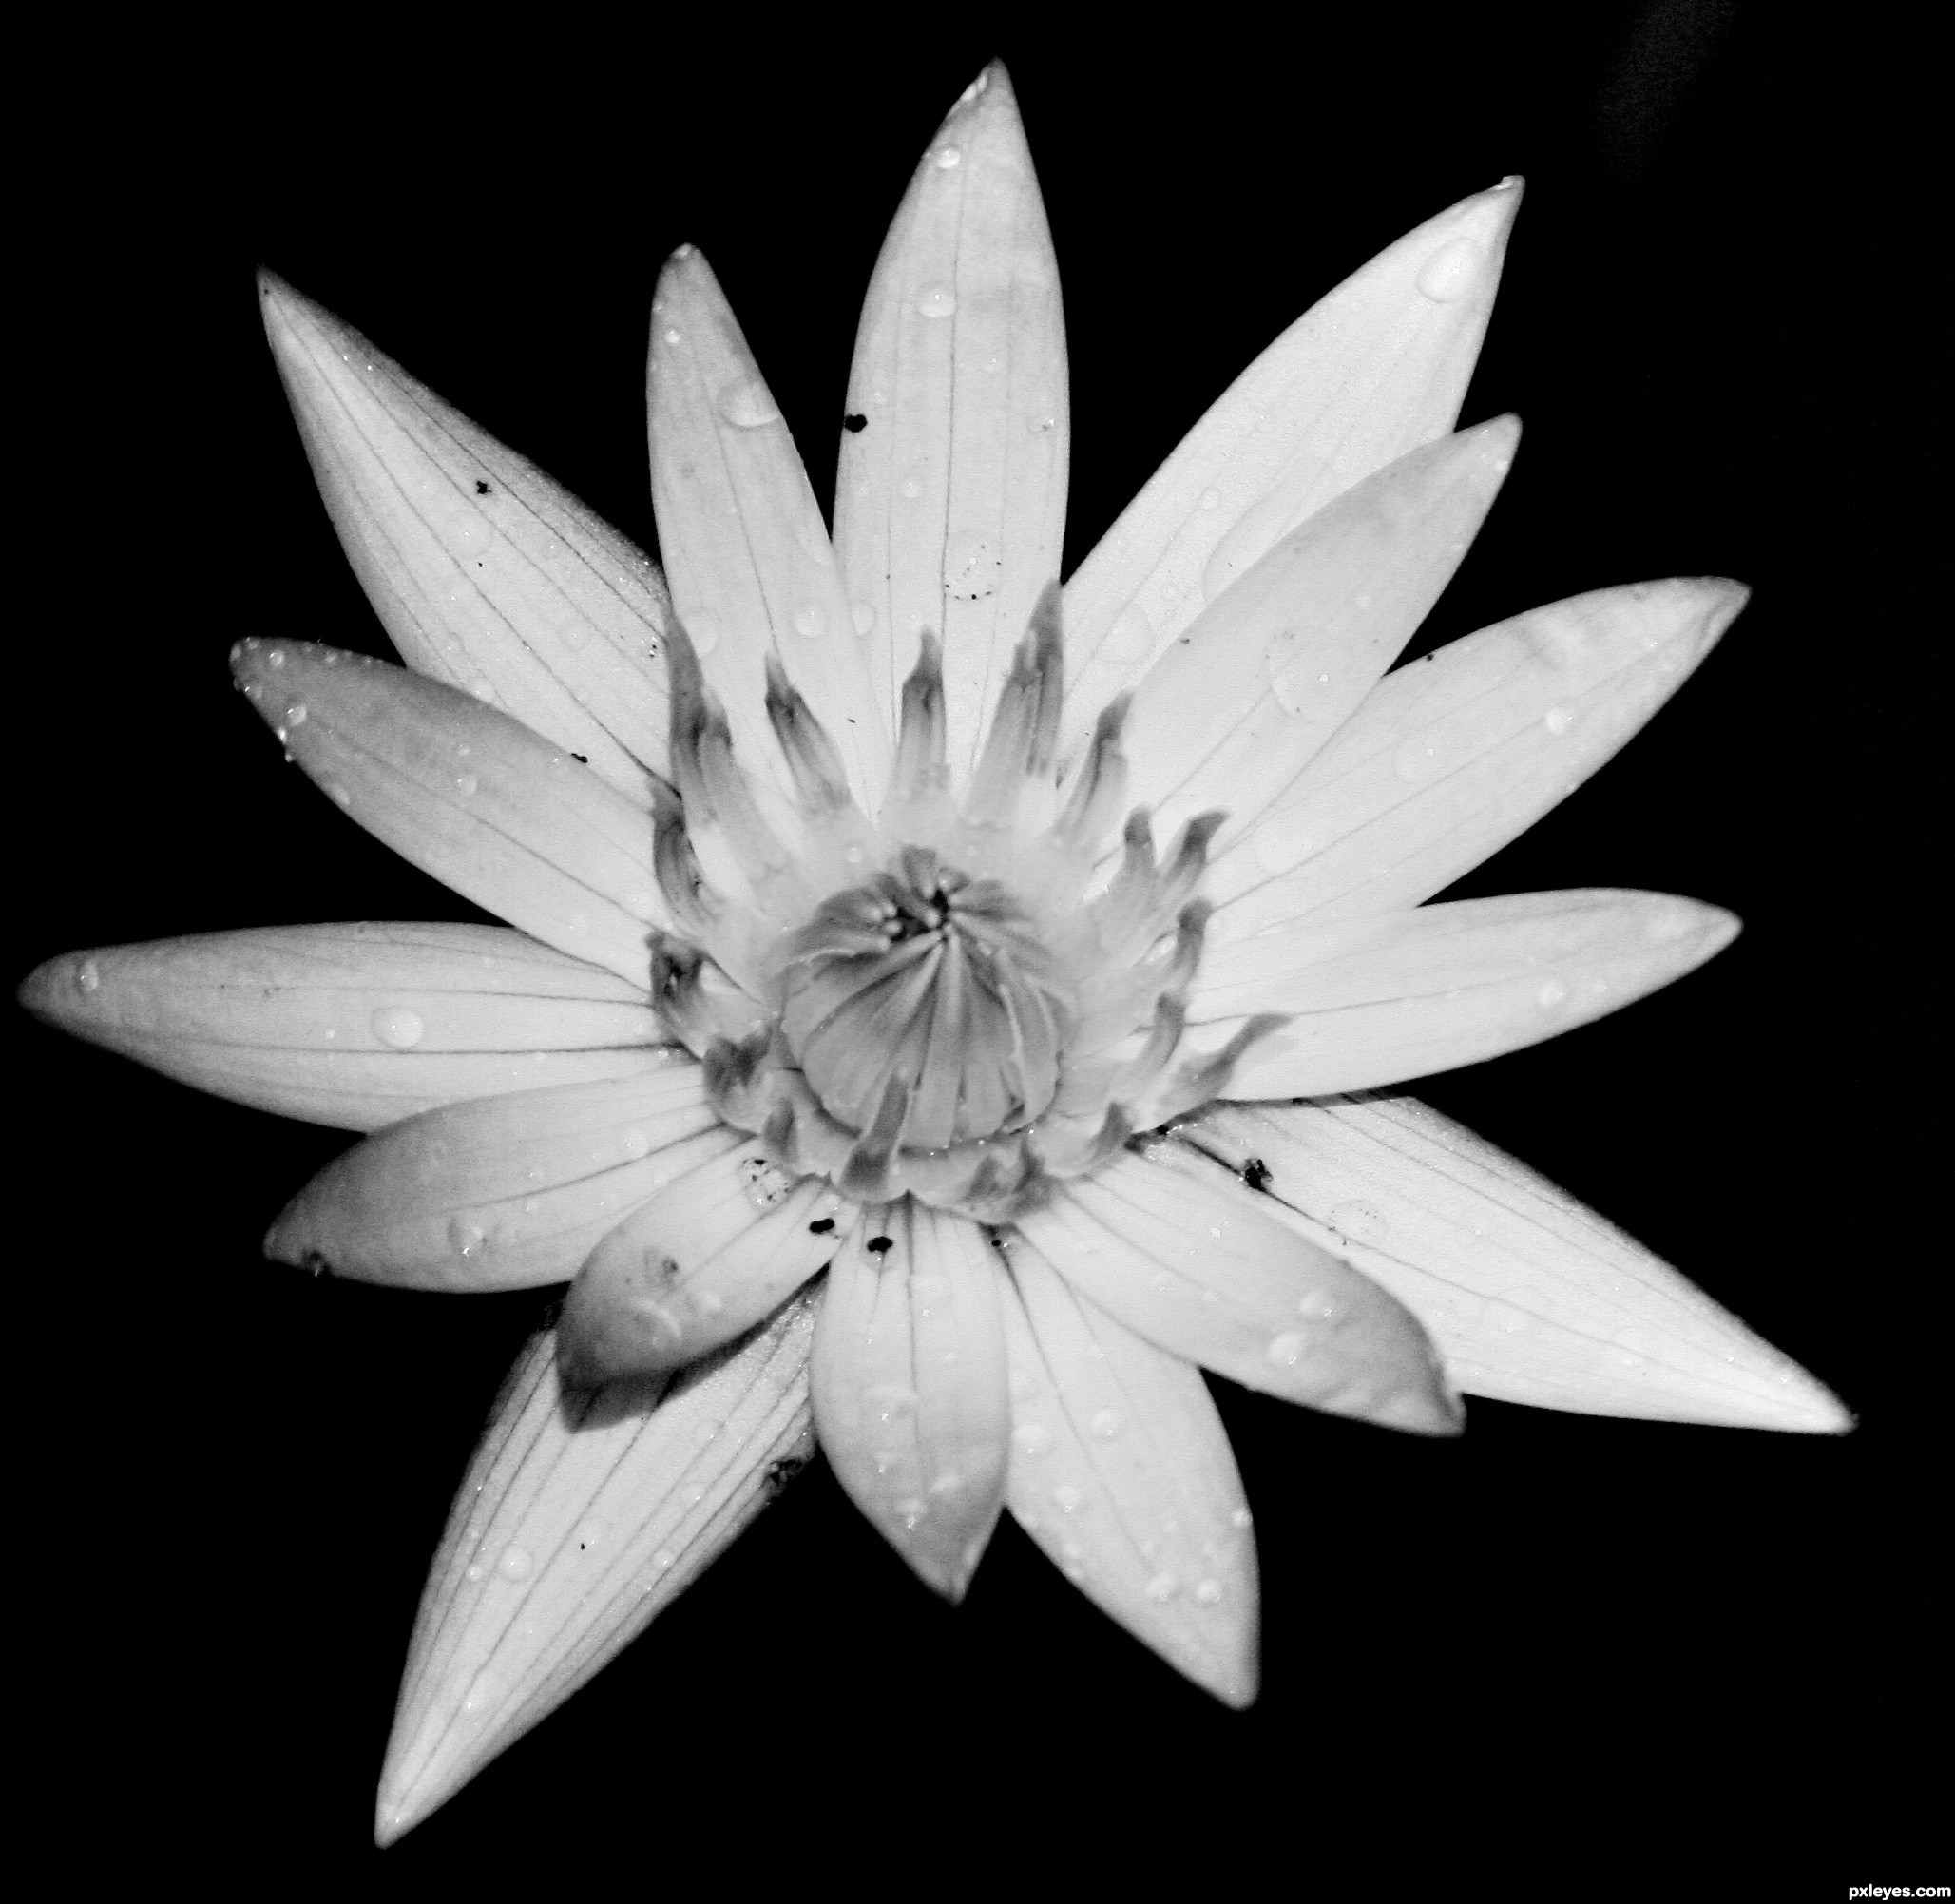 Black and White Flower picture, by meganep1 for: flower closeup 2